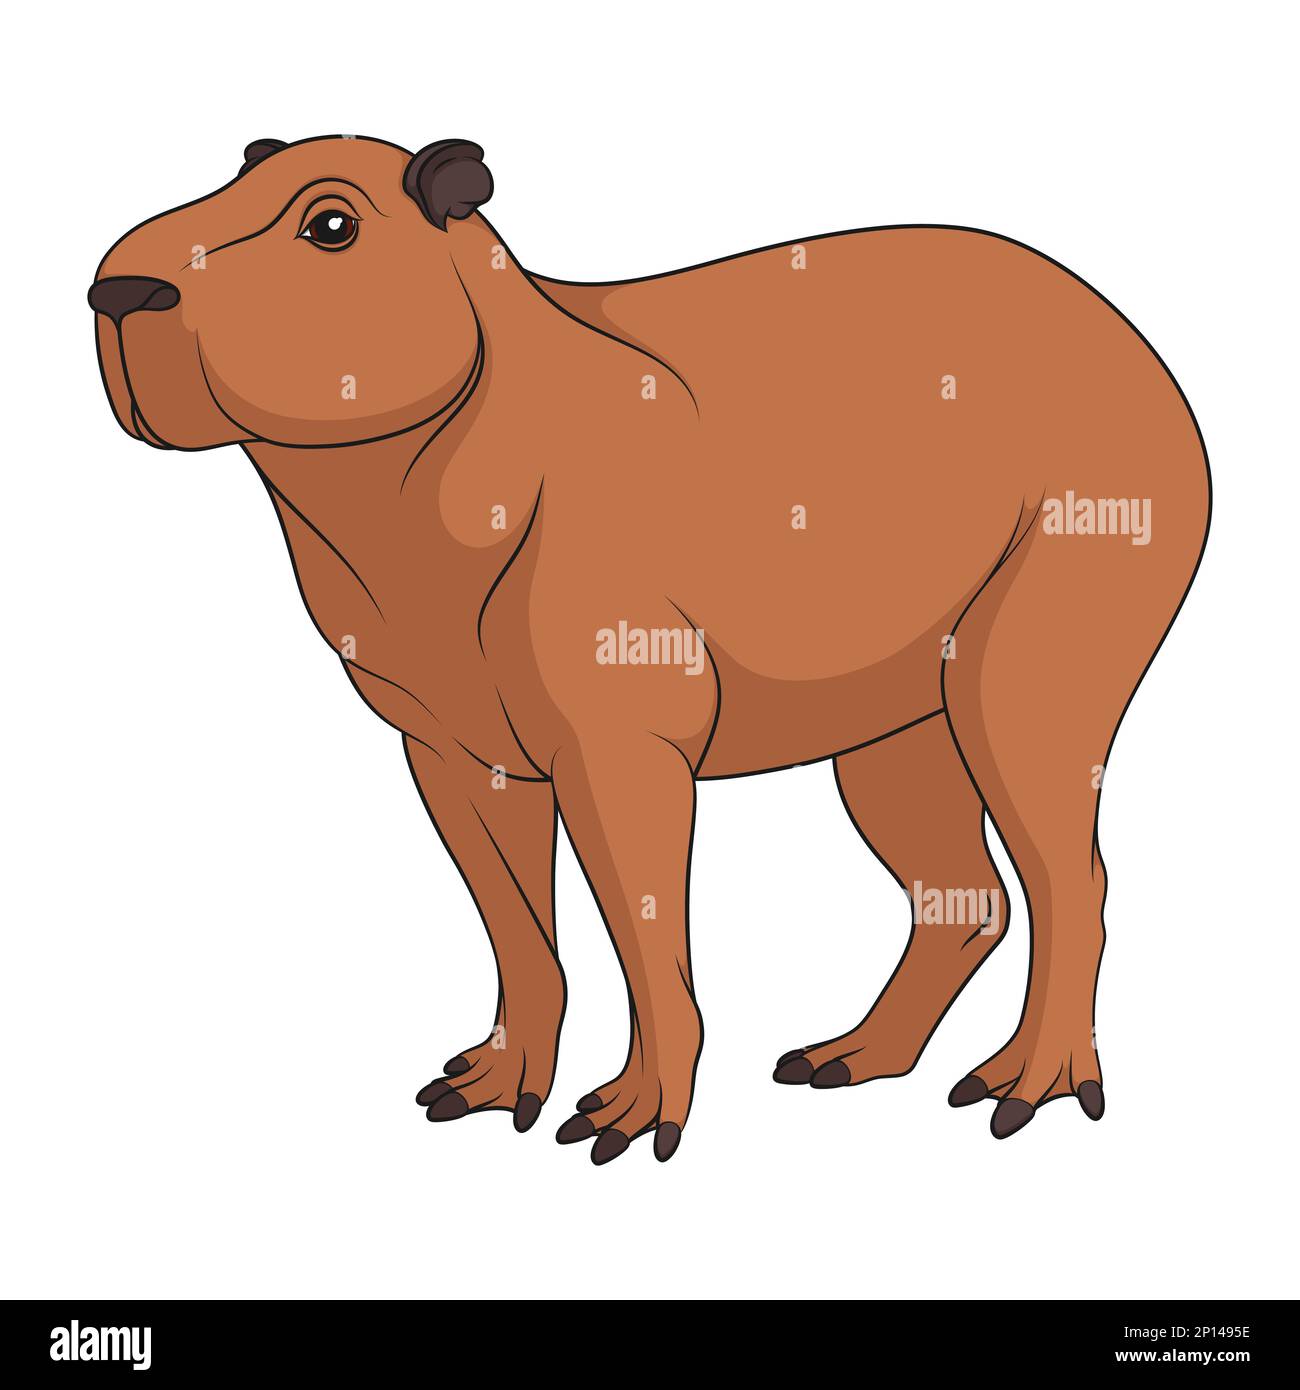 Сolor illustration with capybara. Isolated vector object on white background. Stock Vector